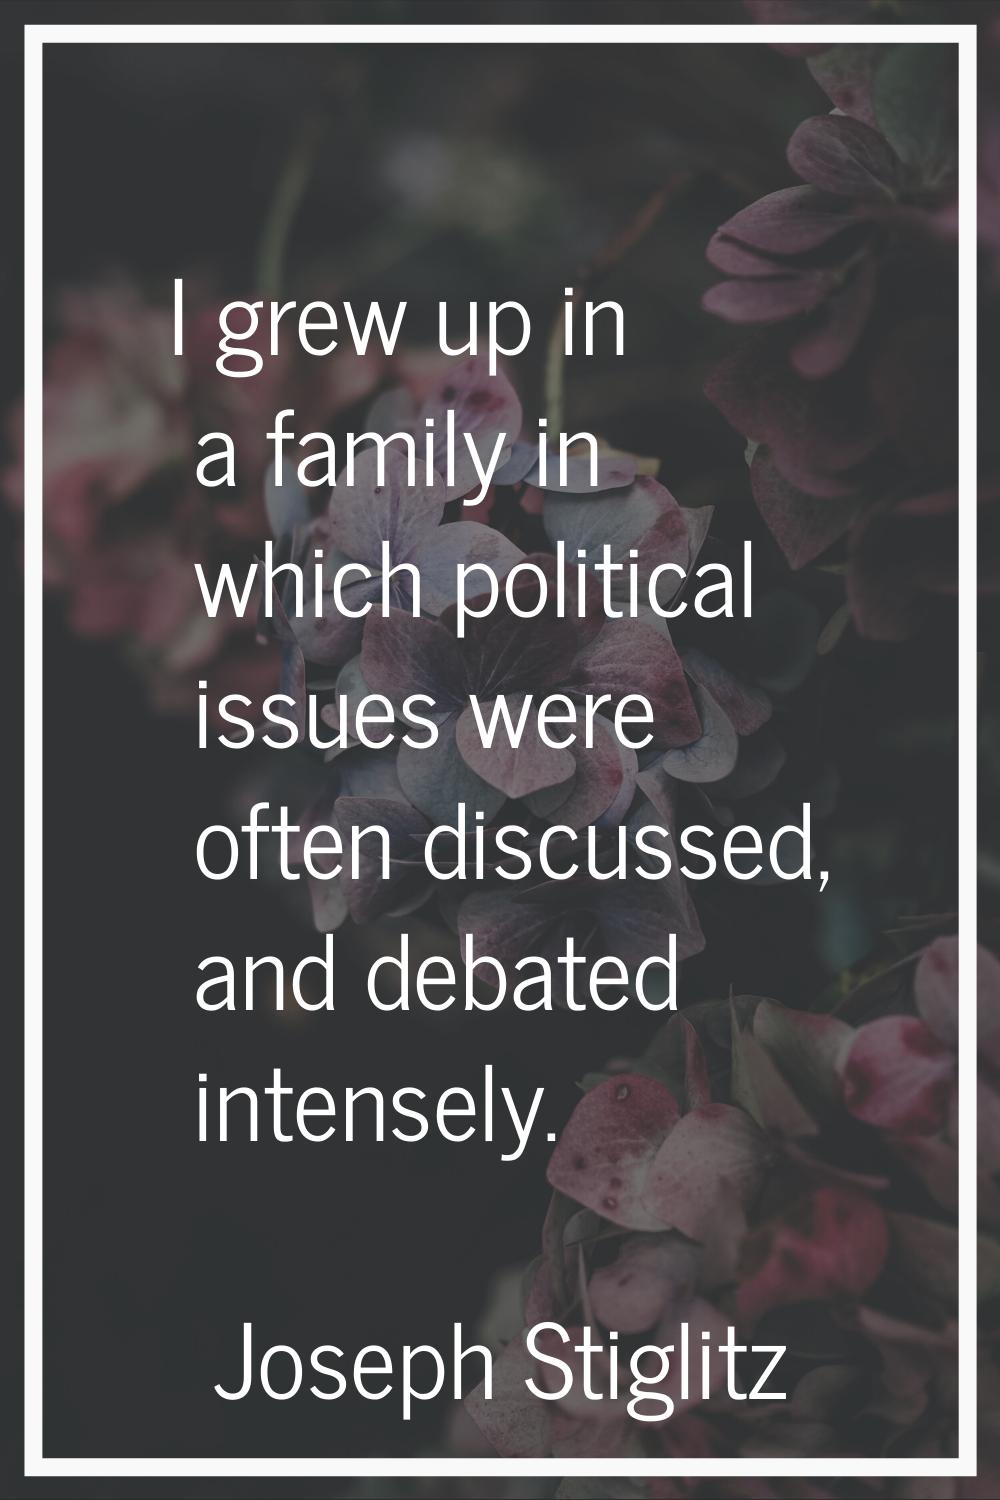 I grew up in a family in which political issues were often discussed, and debated intensely.